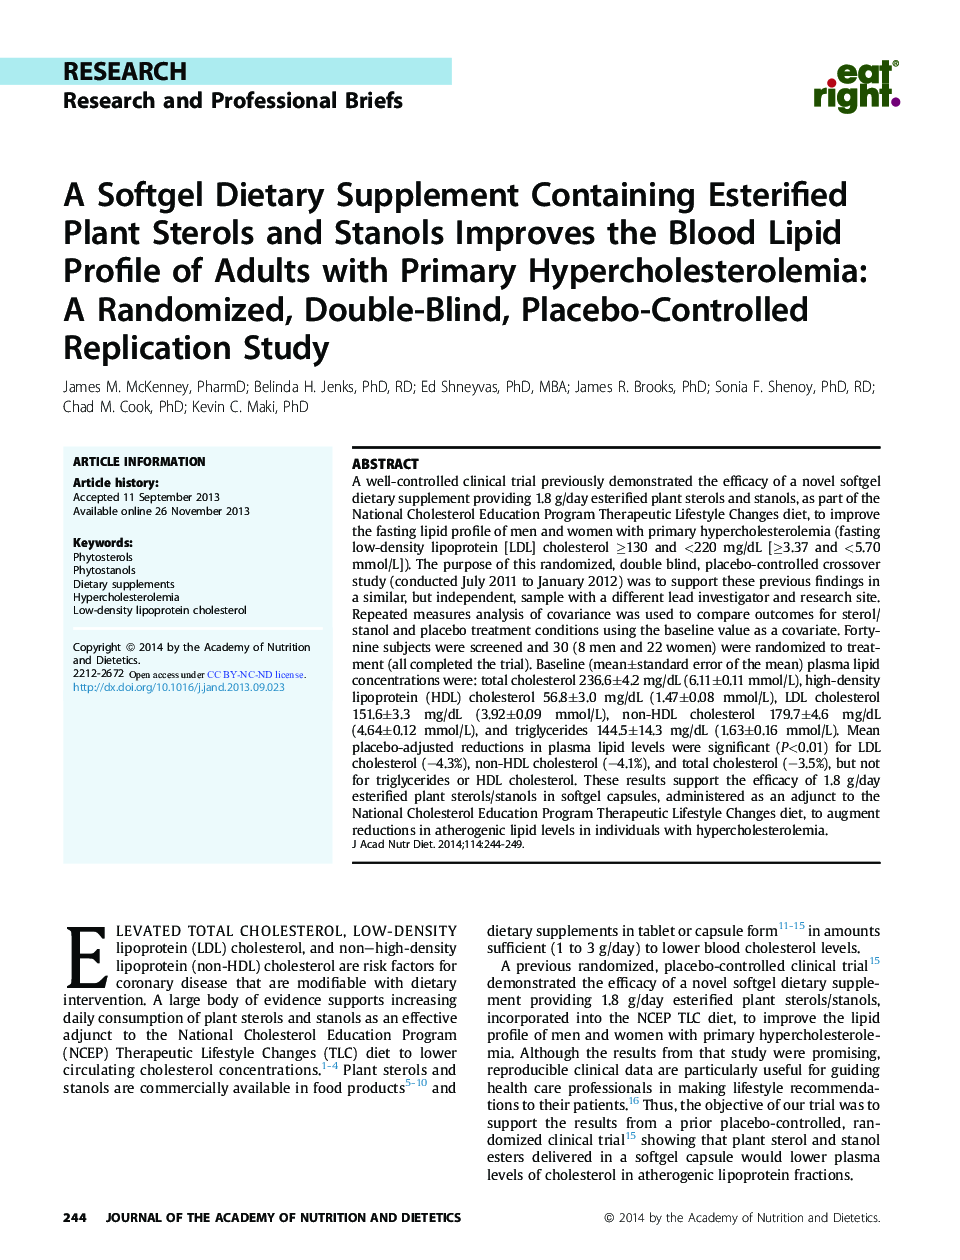 ResearchResearch and Professional BriefsA Softgel Dietary Supplement Containing Esterified Plant Sterols and Stanols Improves the Blood Lipid Profile of Adults with Primary Hypercholesterolemia: A Randomized, Double-Blind, Placebo-Controlled Replication S